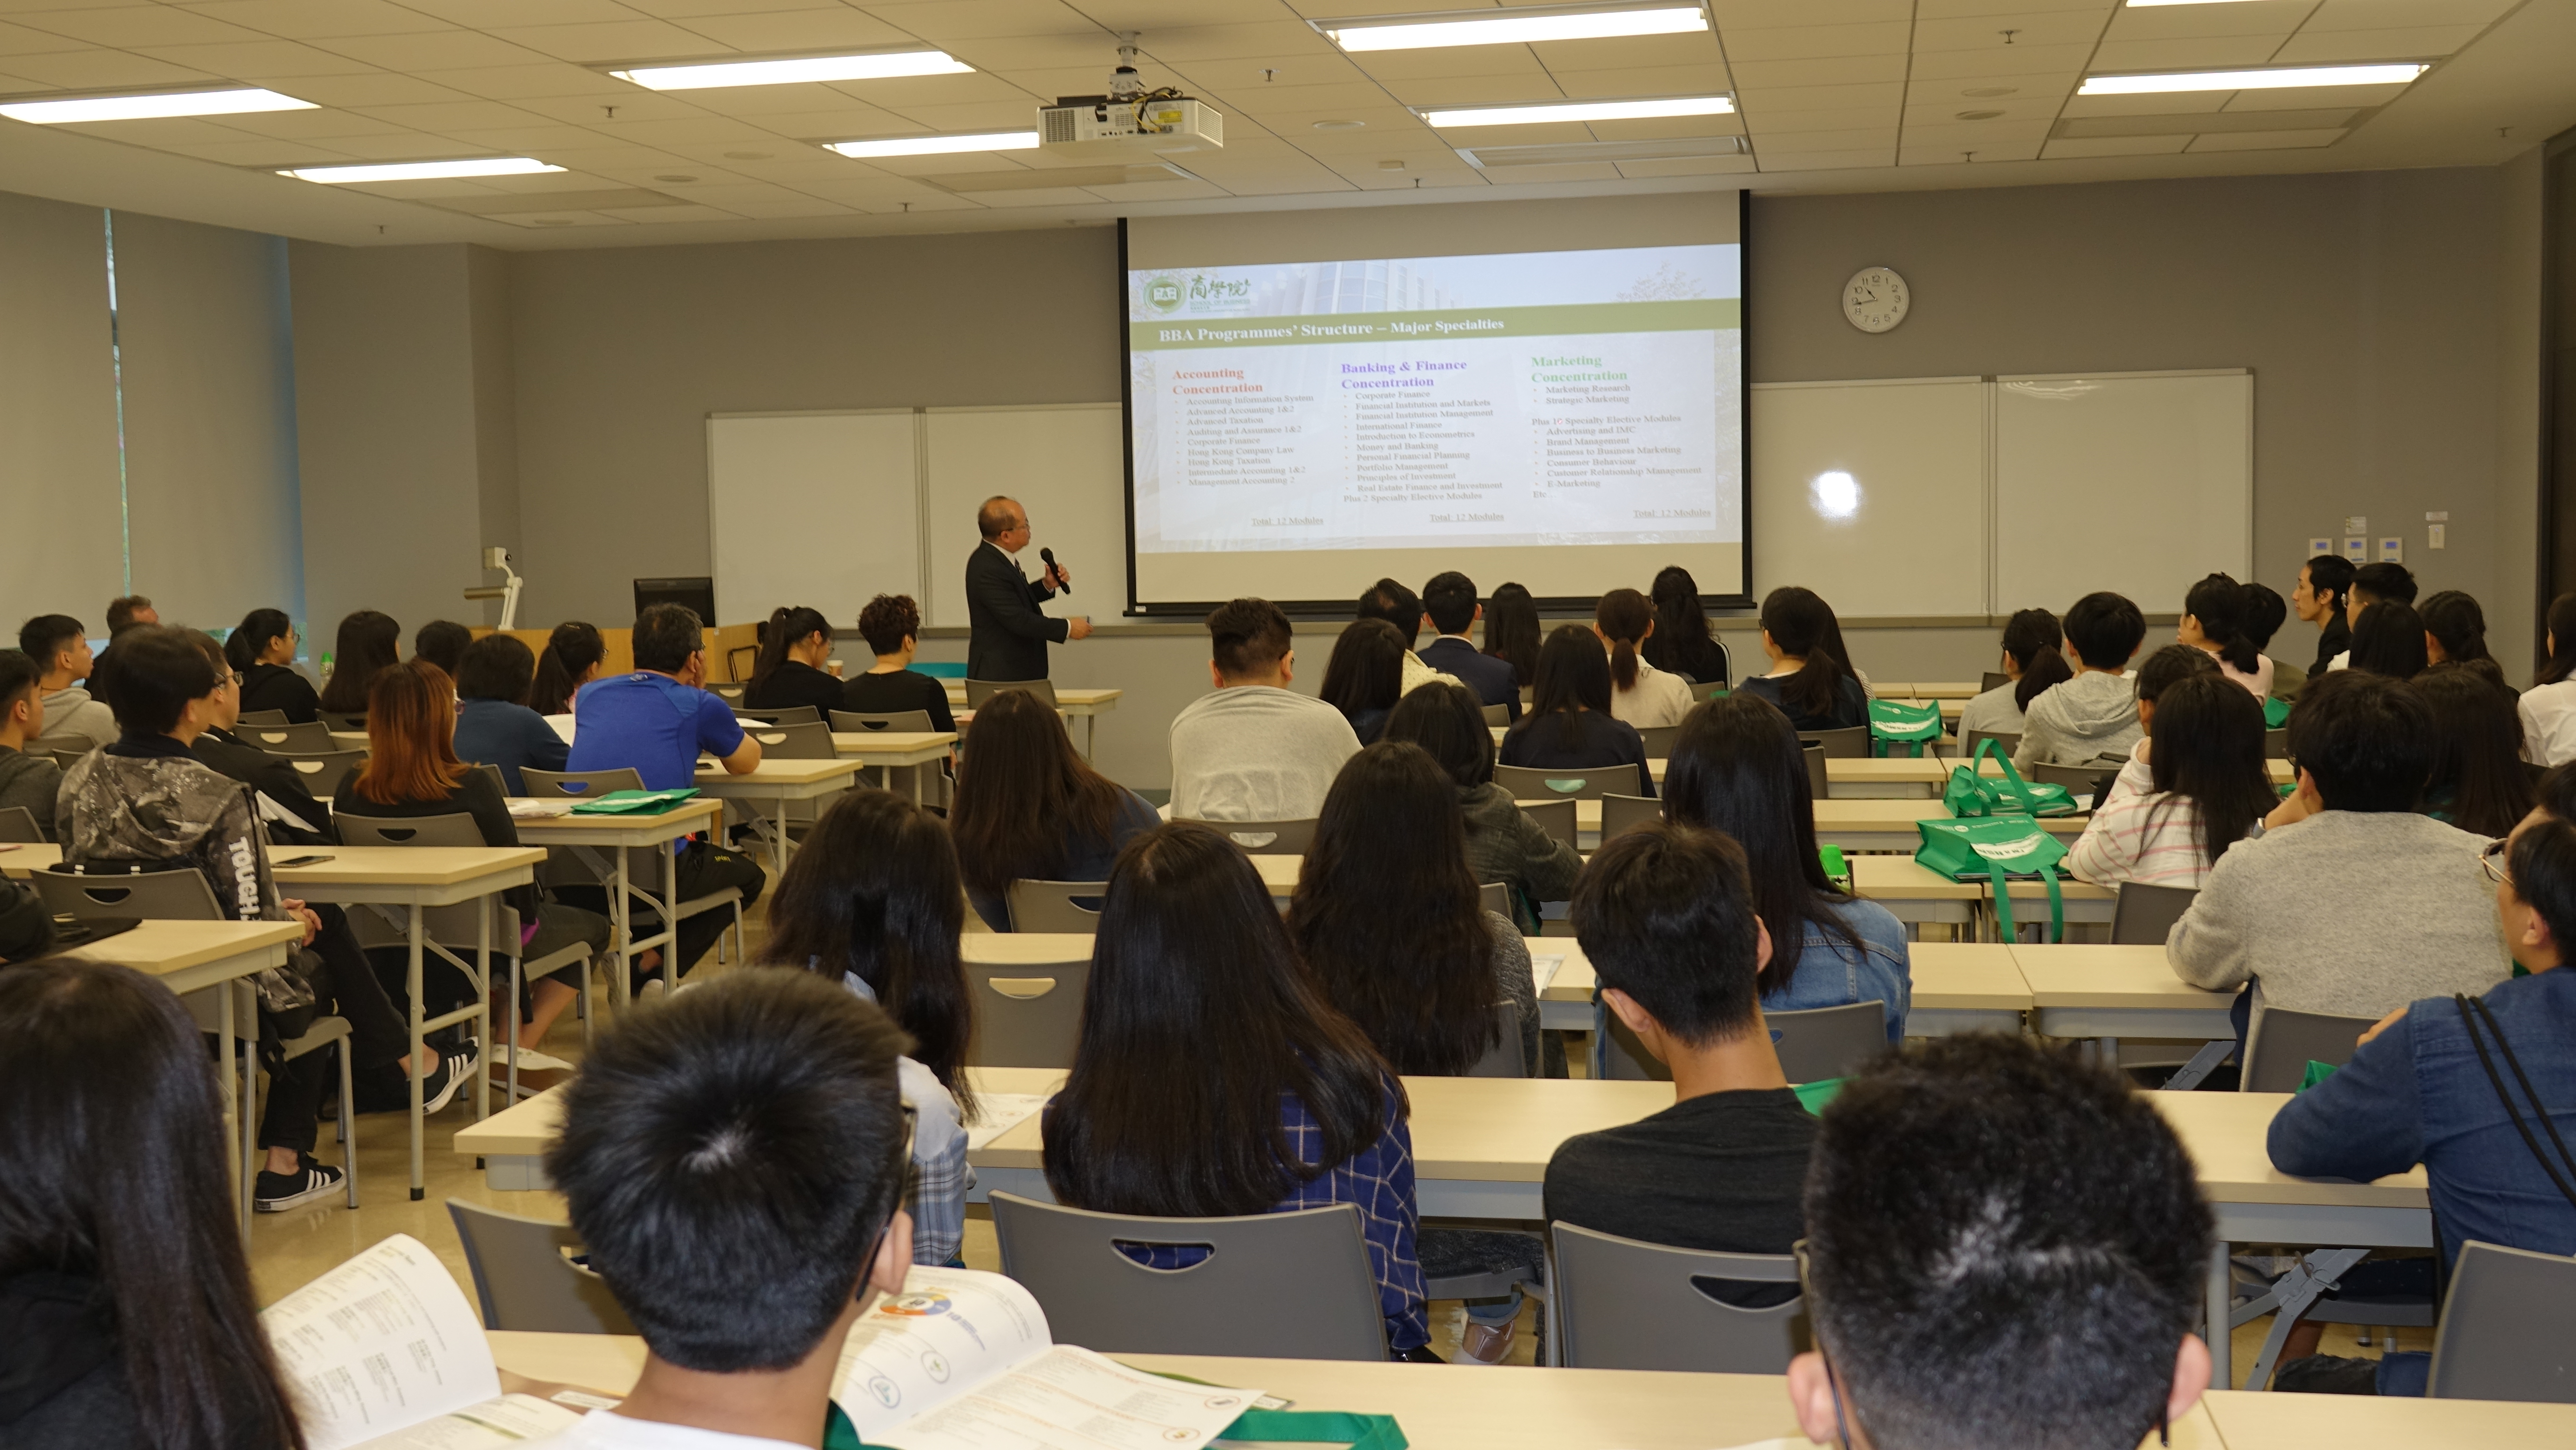 Dr Leung providing a run-down of the Bachelor of Business Administration (Honours) Programmes offered by the School.